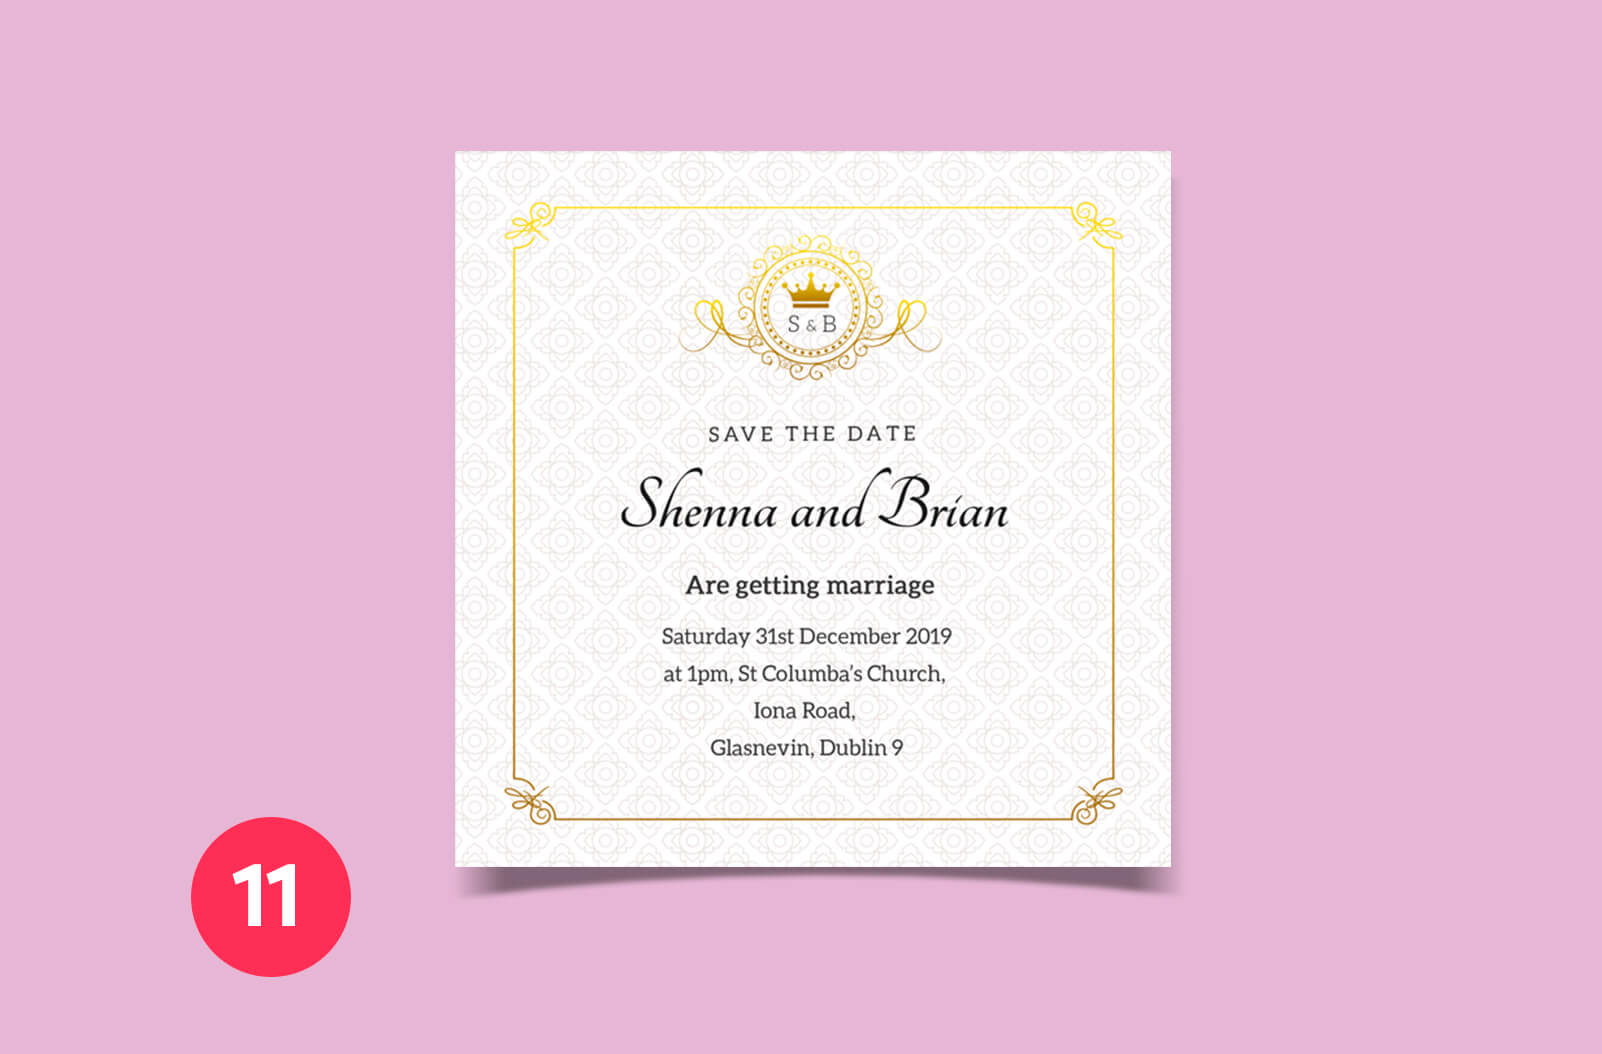 Save the Date Cards Ireland